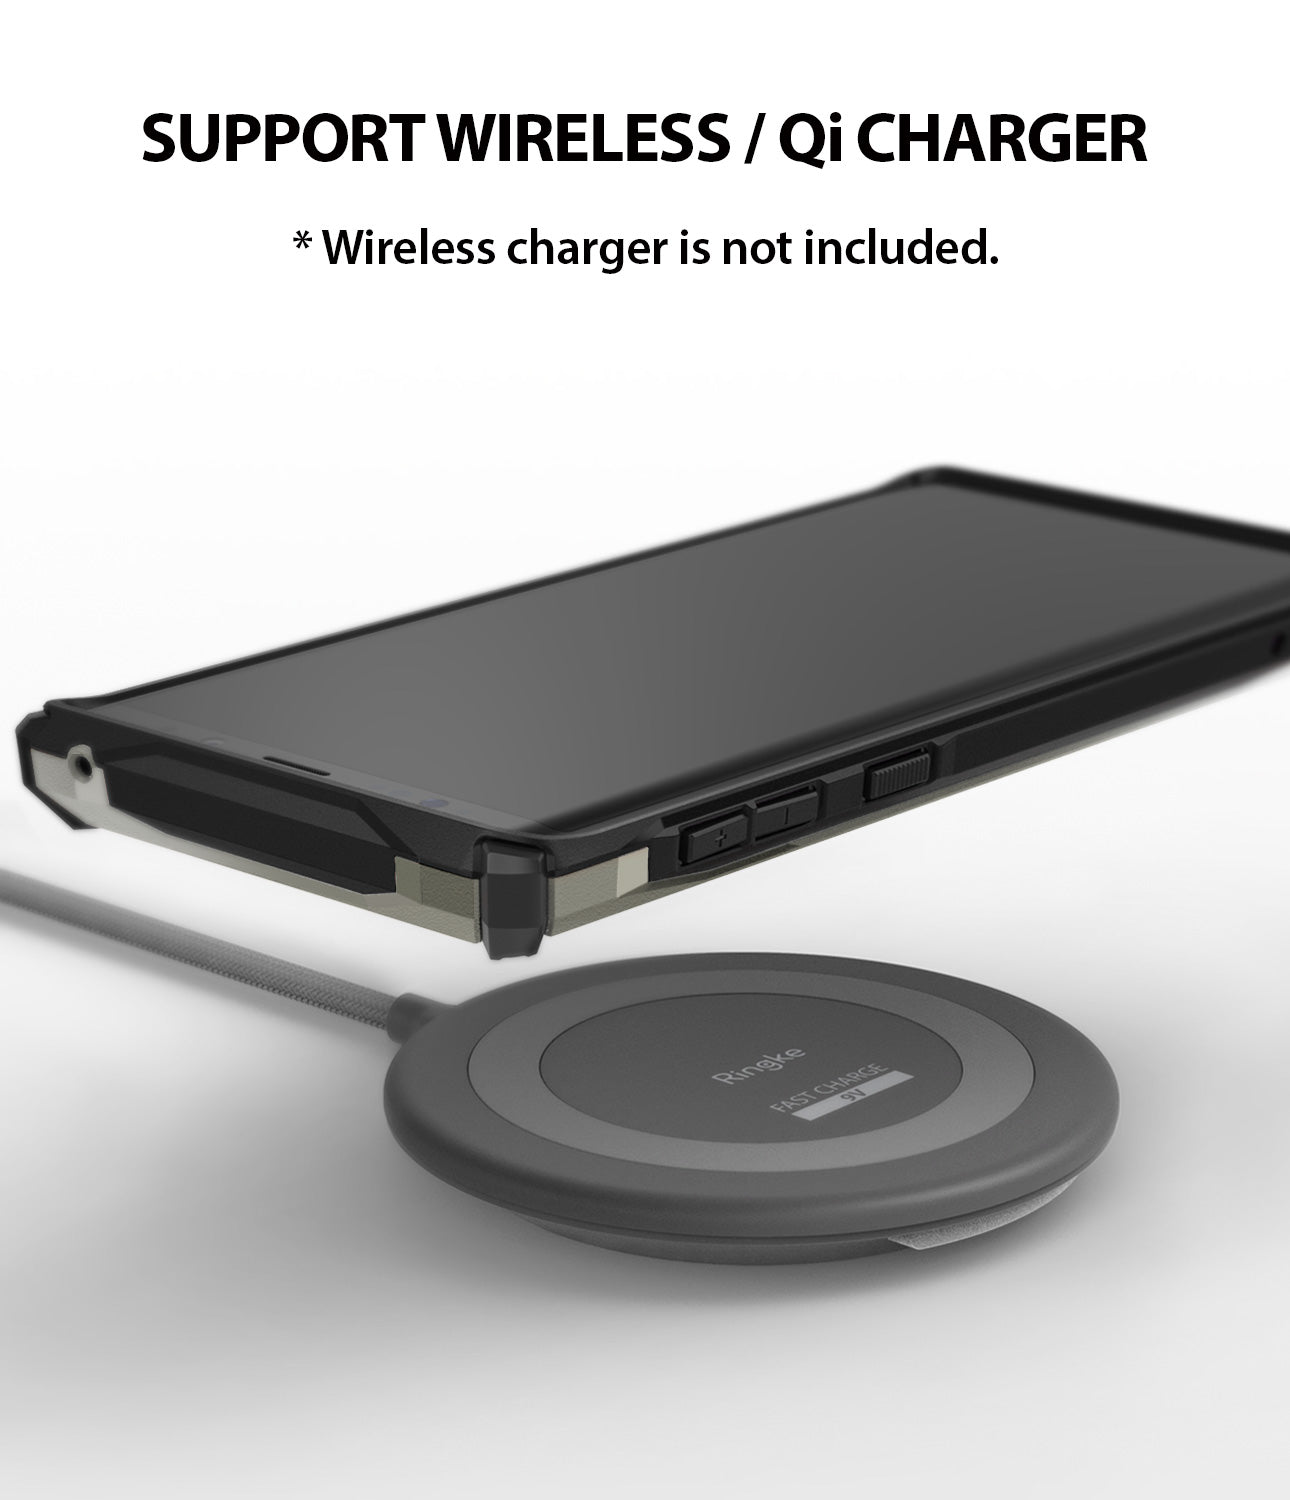 support wireless / qi charger